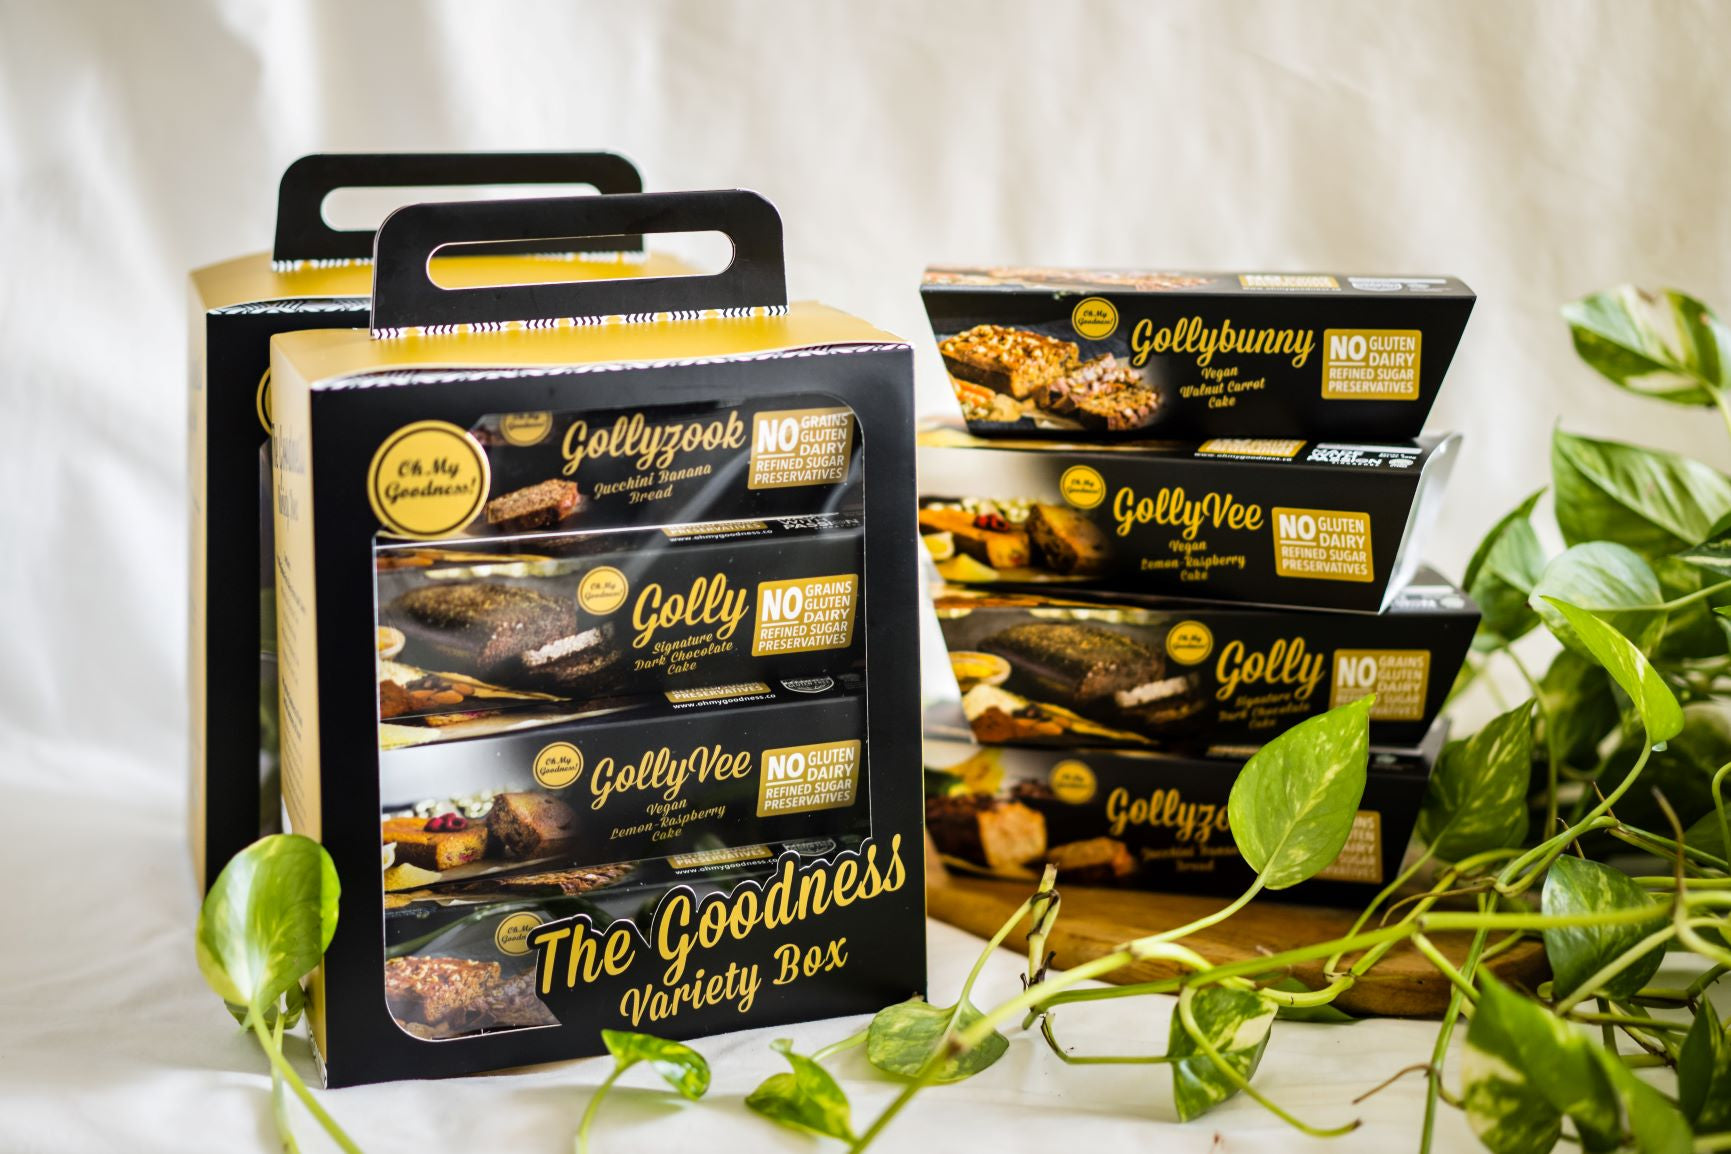 The Goodness Variety Box <br> (1 box  x 4 loaf cakes)